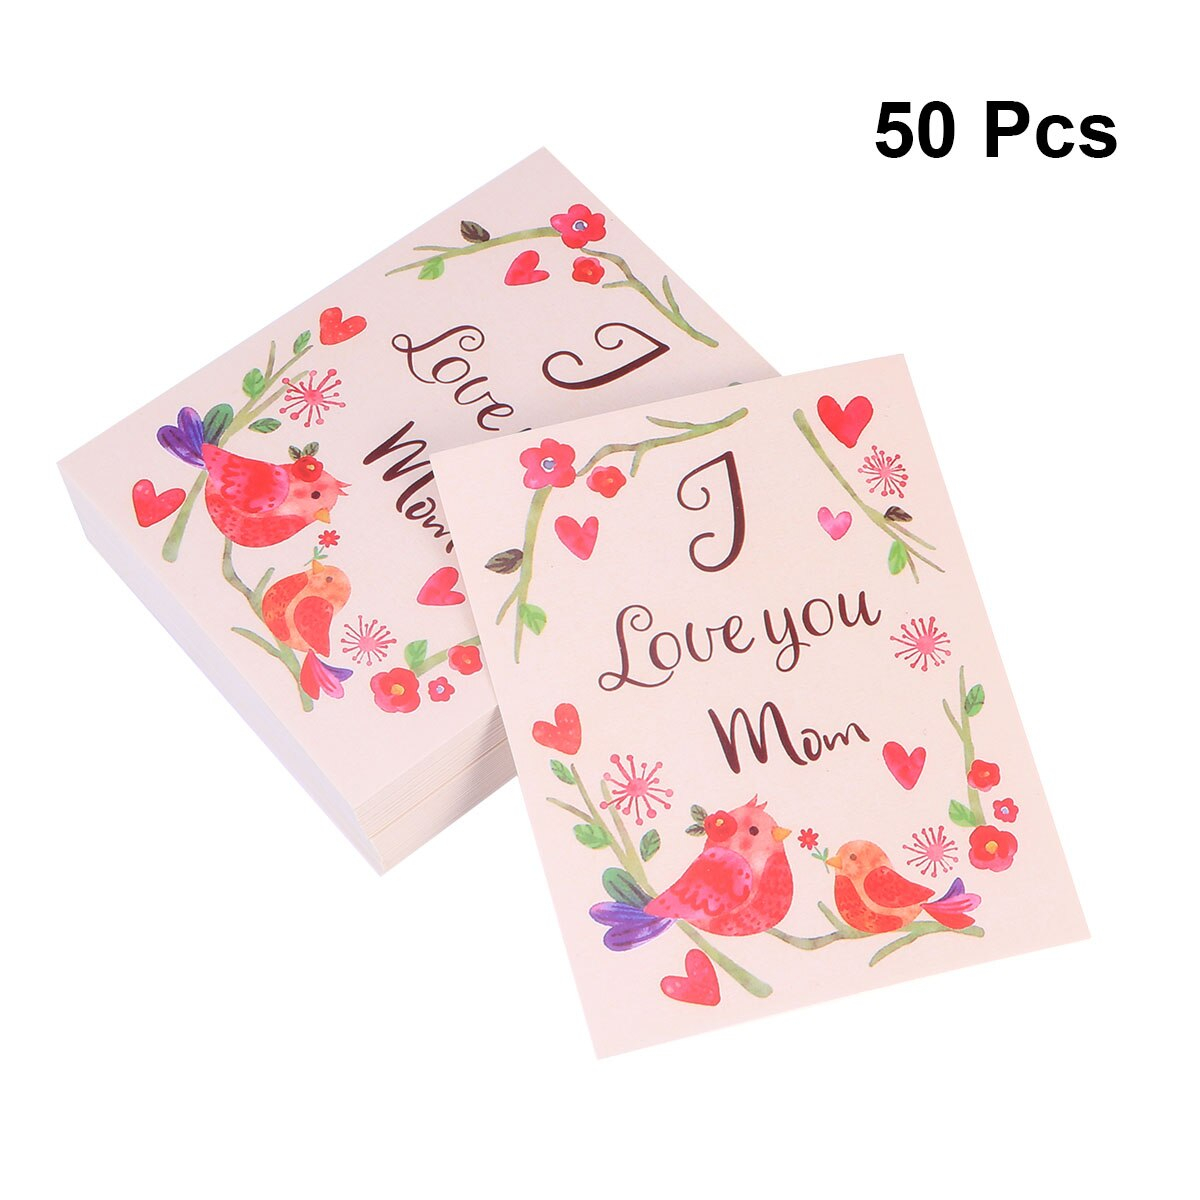 Birthday Card Invitation Ideas Us 412 41 Off50 Pcs Greeting Cards Handmade Small Fresh Decorative Cards Invitation Cards For Birthday Party Thanksgiving Day Mothers Day In Cards